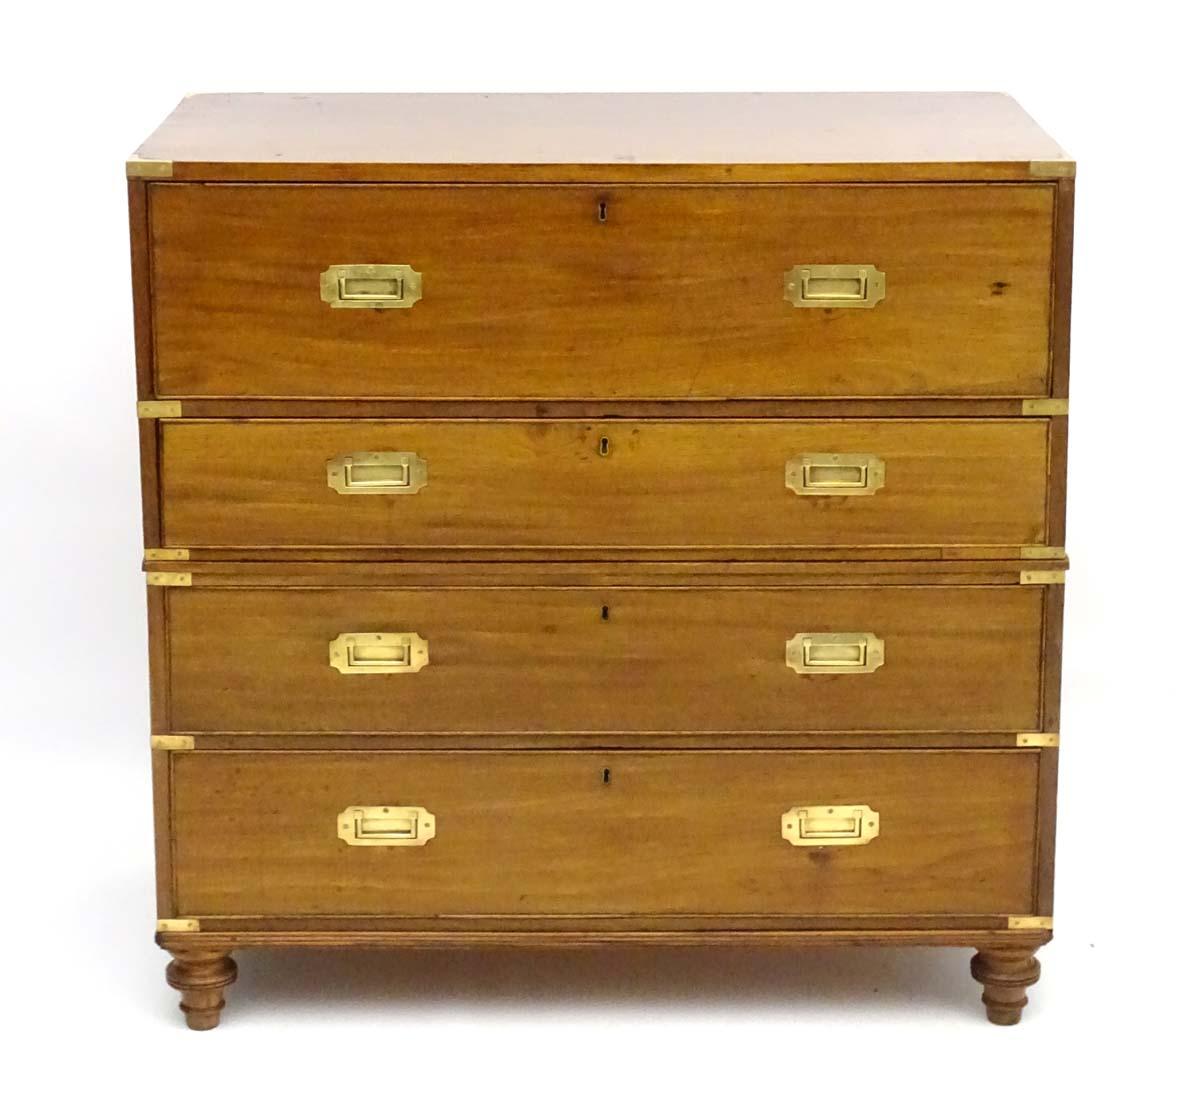 English Gillows of Lancaster Campaign Chest of Drawers Secretaire Antique, circa 1850